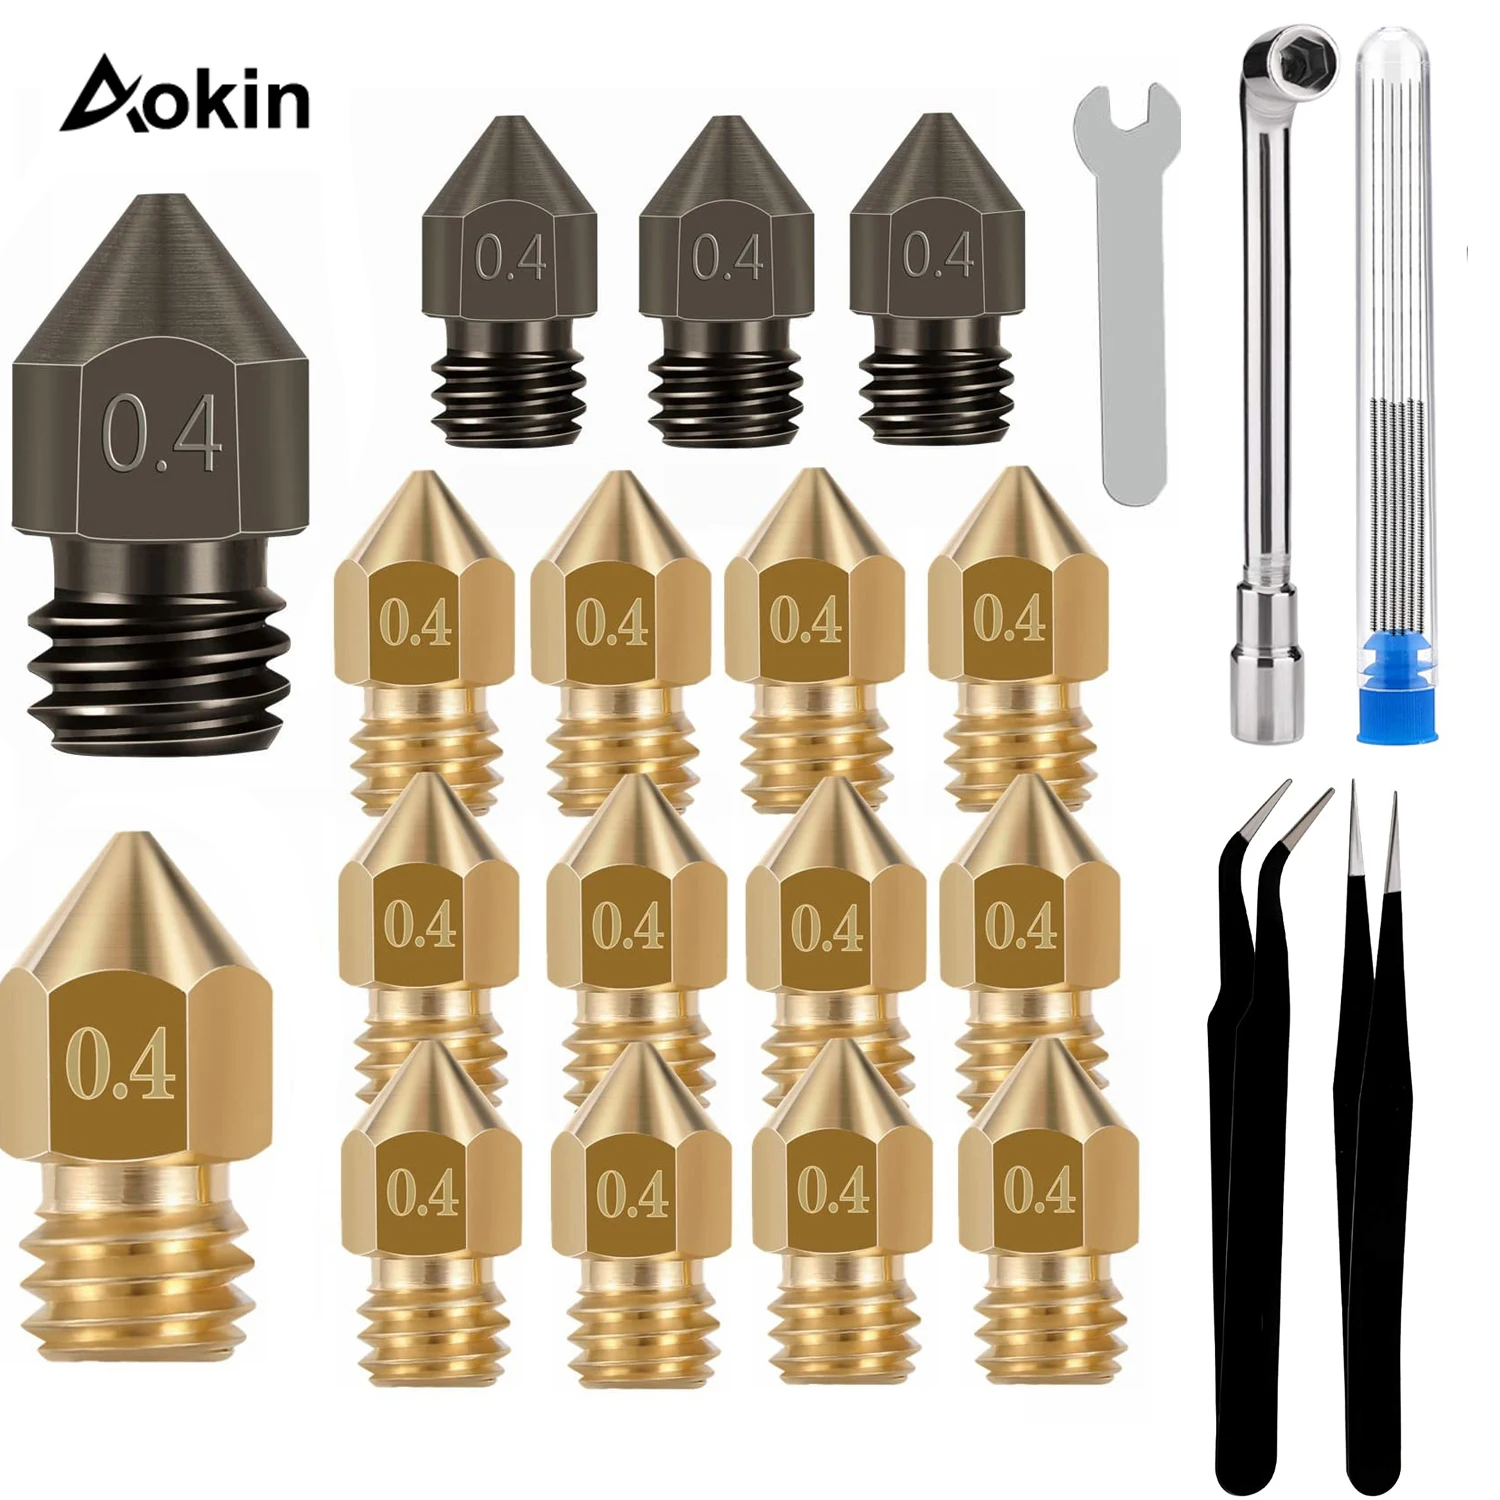 MK8 Nozzle 0.2mm 0.3mm 0.4 mm 0.6mm Hardened Steel Brass 3D Printer Extruder Wear Resistant Nozzle for Makerbot Creality CR-10